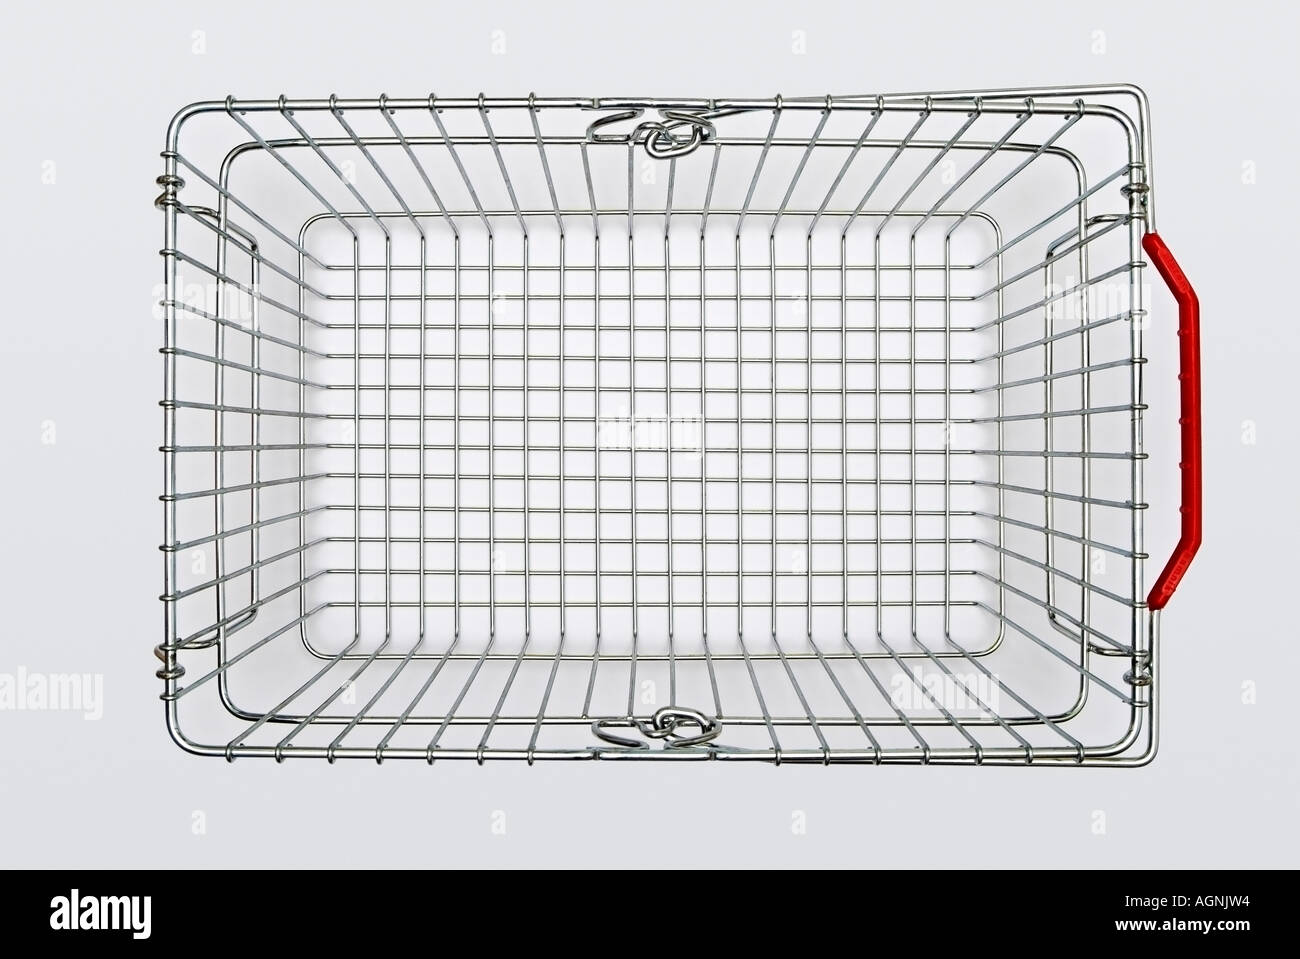 Empty Shopping Basket Overhead View Stock Photo